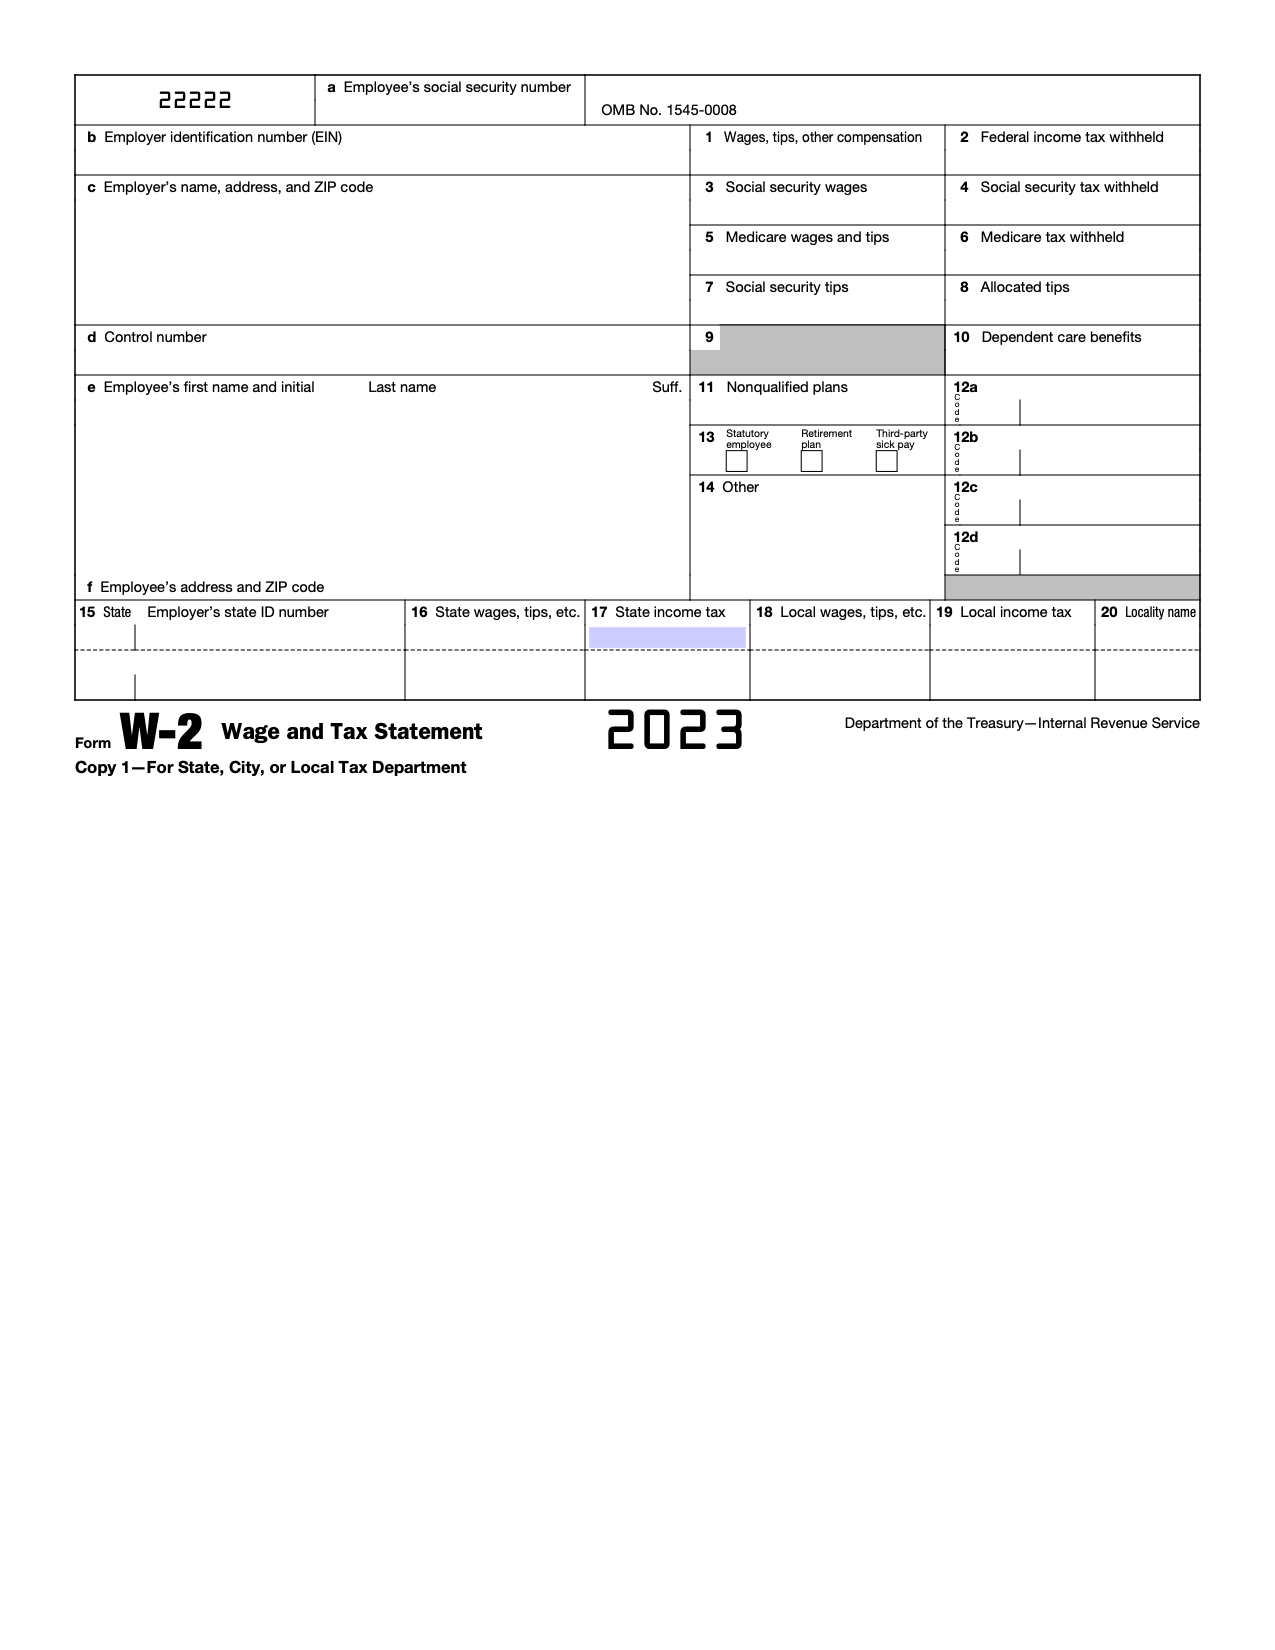 Free Irs Form W-2 | Wage And Tax Statement - Pdf – Eforms with regard to Advance Auto Parts W2 Former Employee